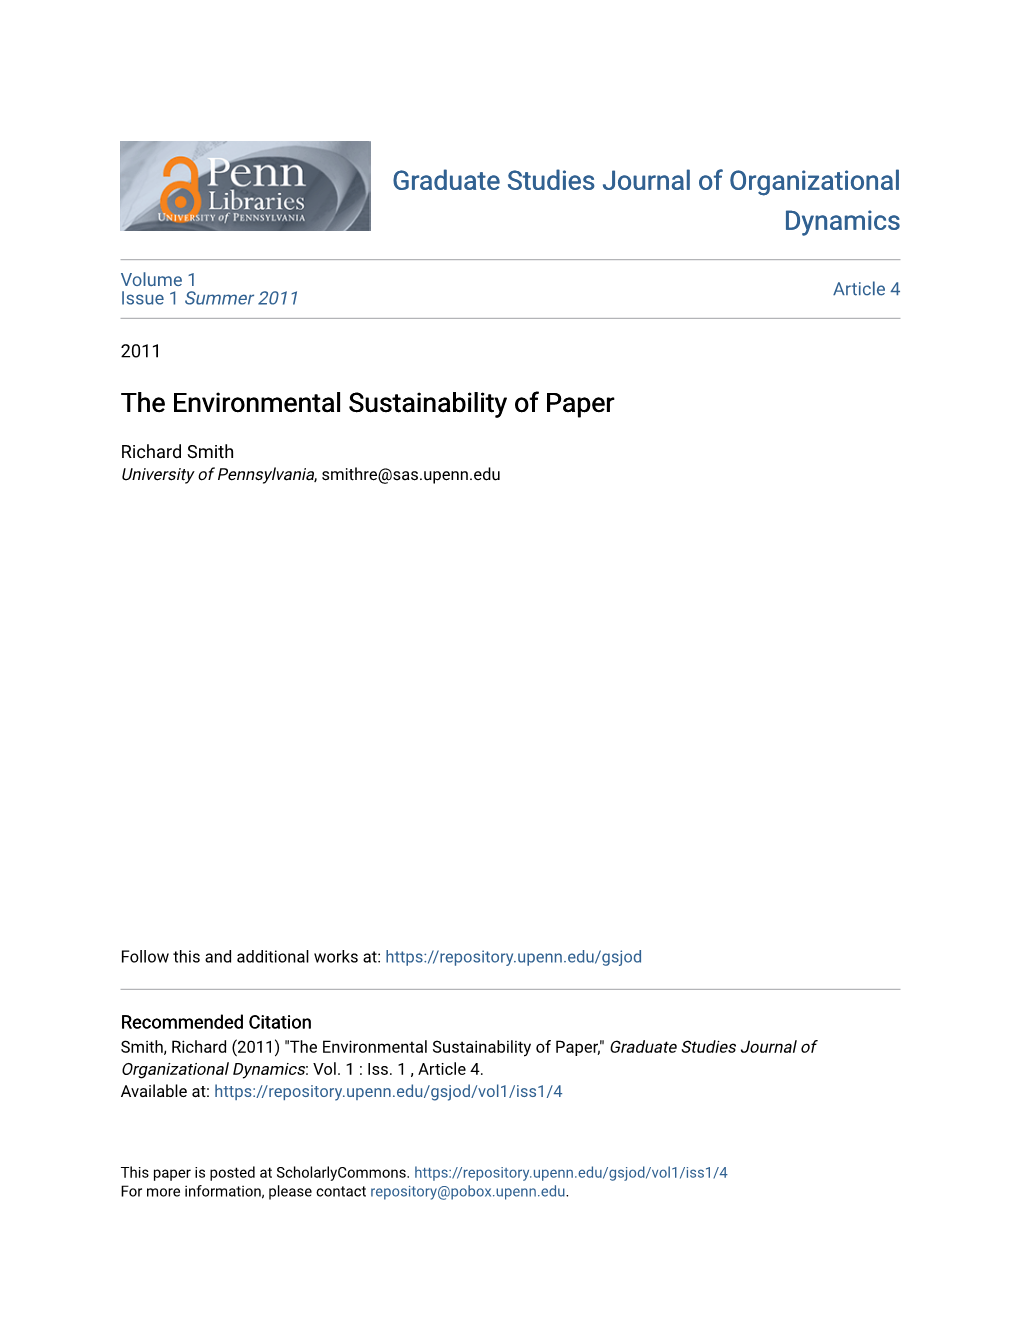 The Environmental Sustainability of Paper